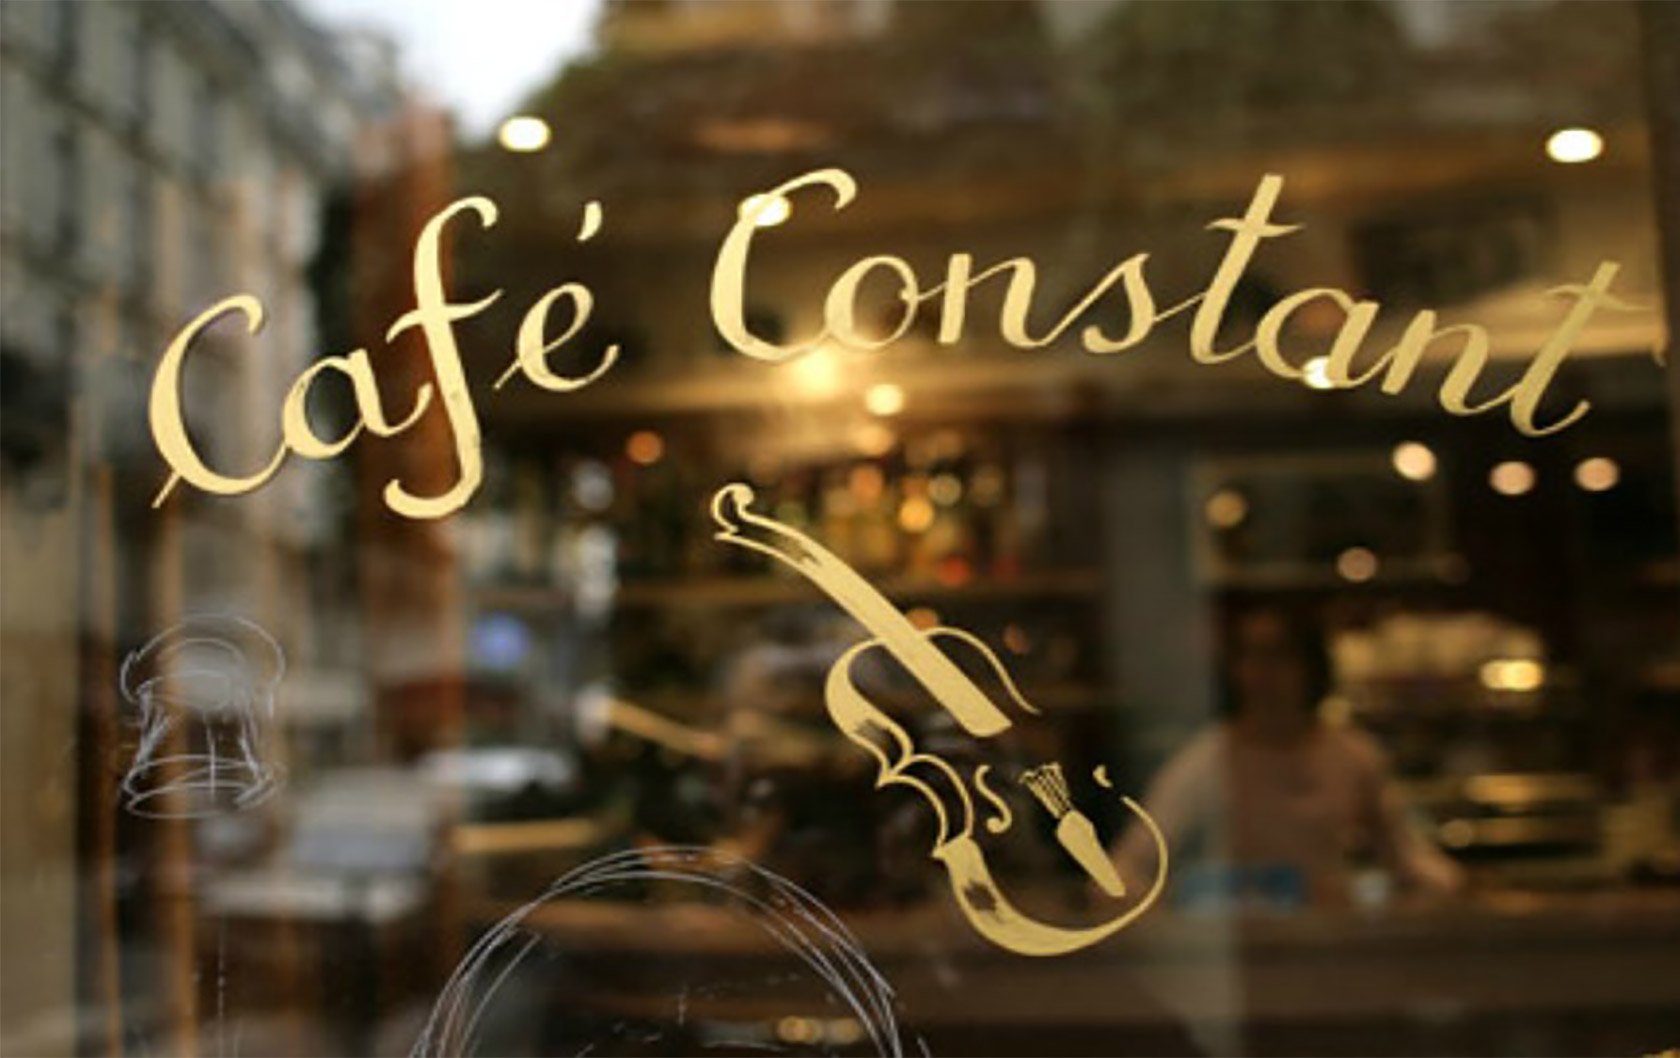 7th-restaurant-cafe-constant